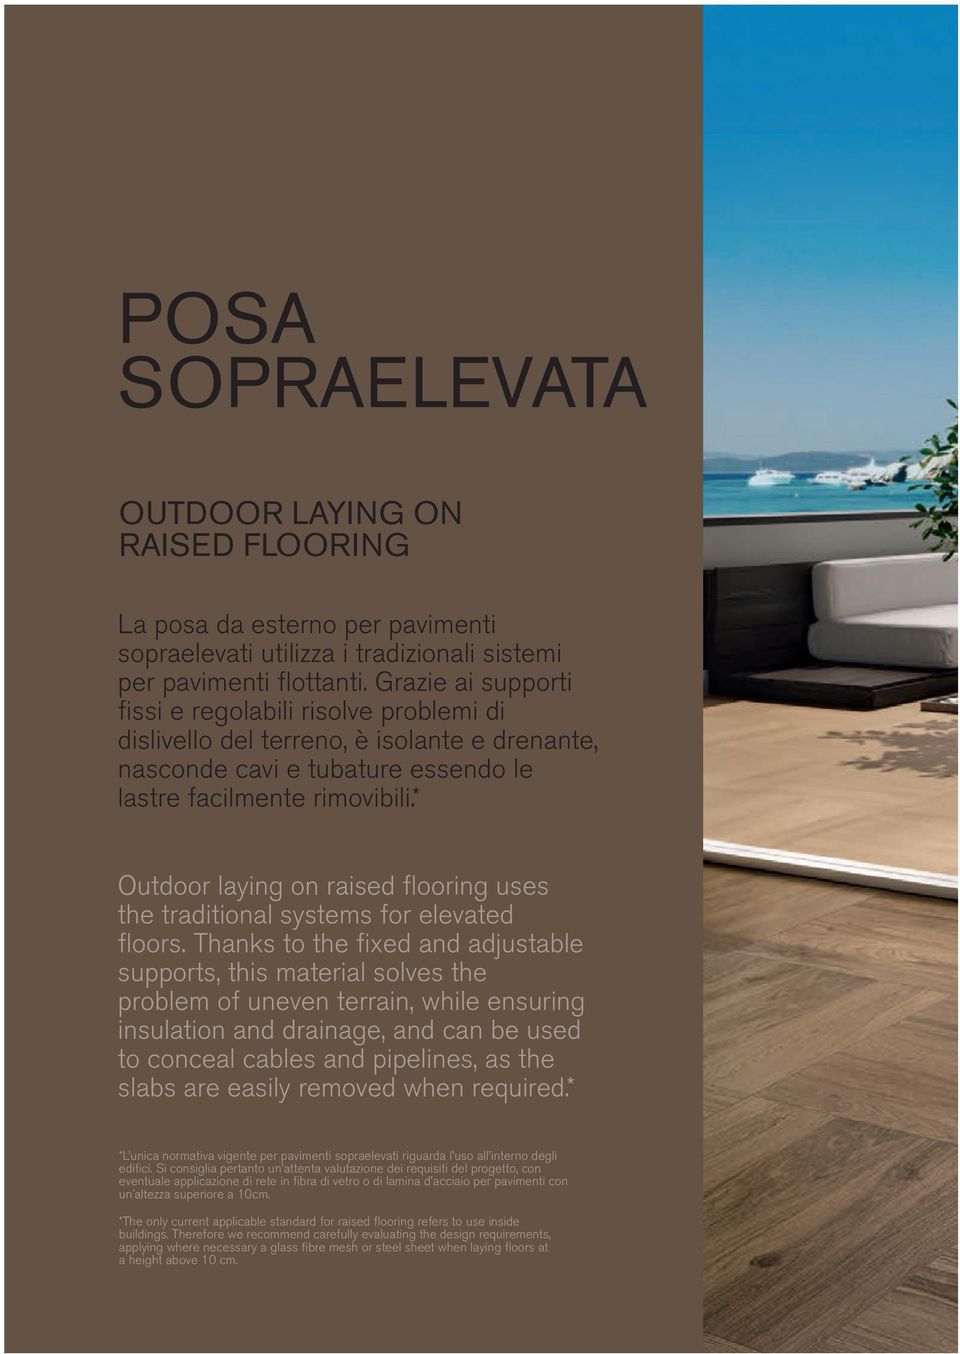 * Outdoor laying on raised flooring uses the traditional systems for elevated floors.